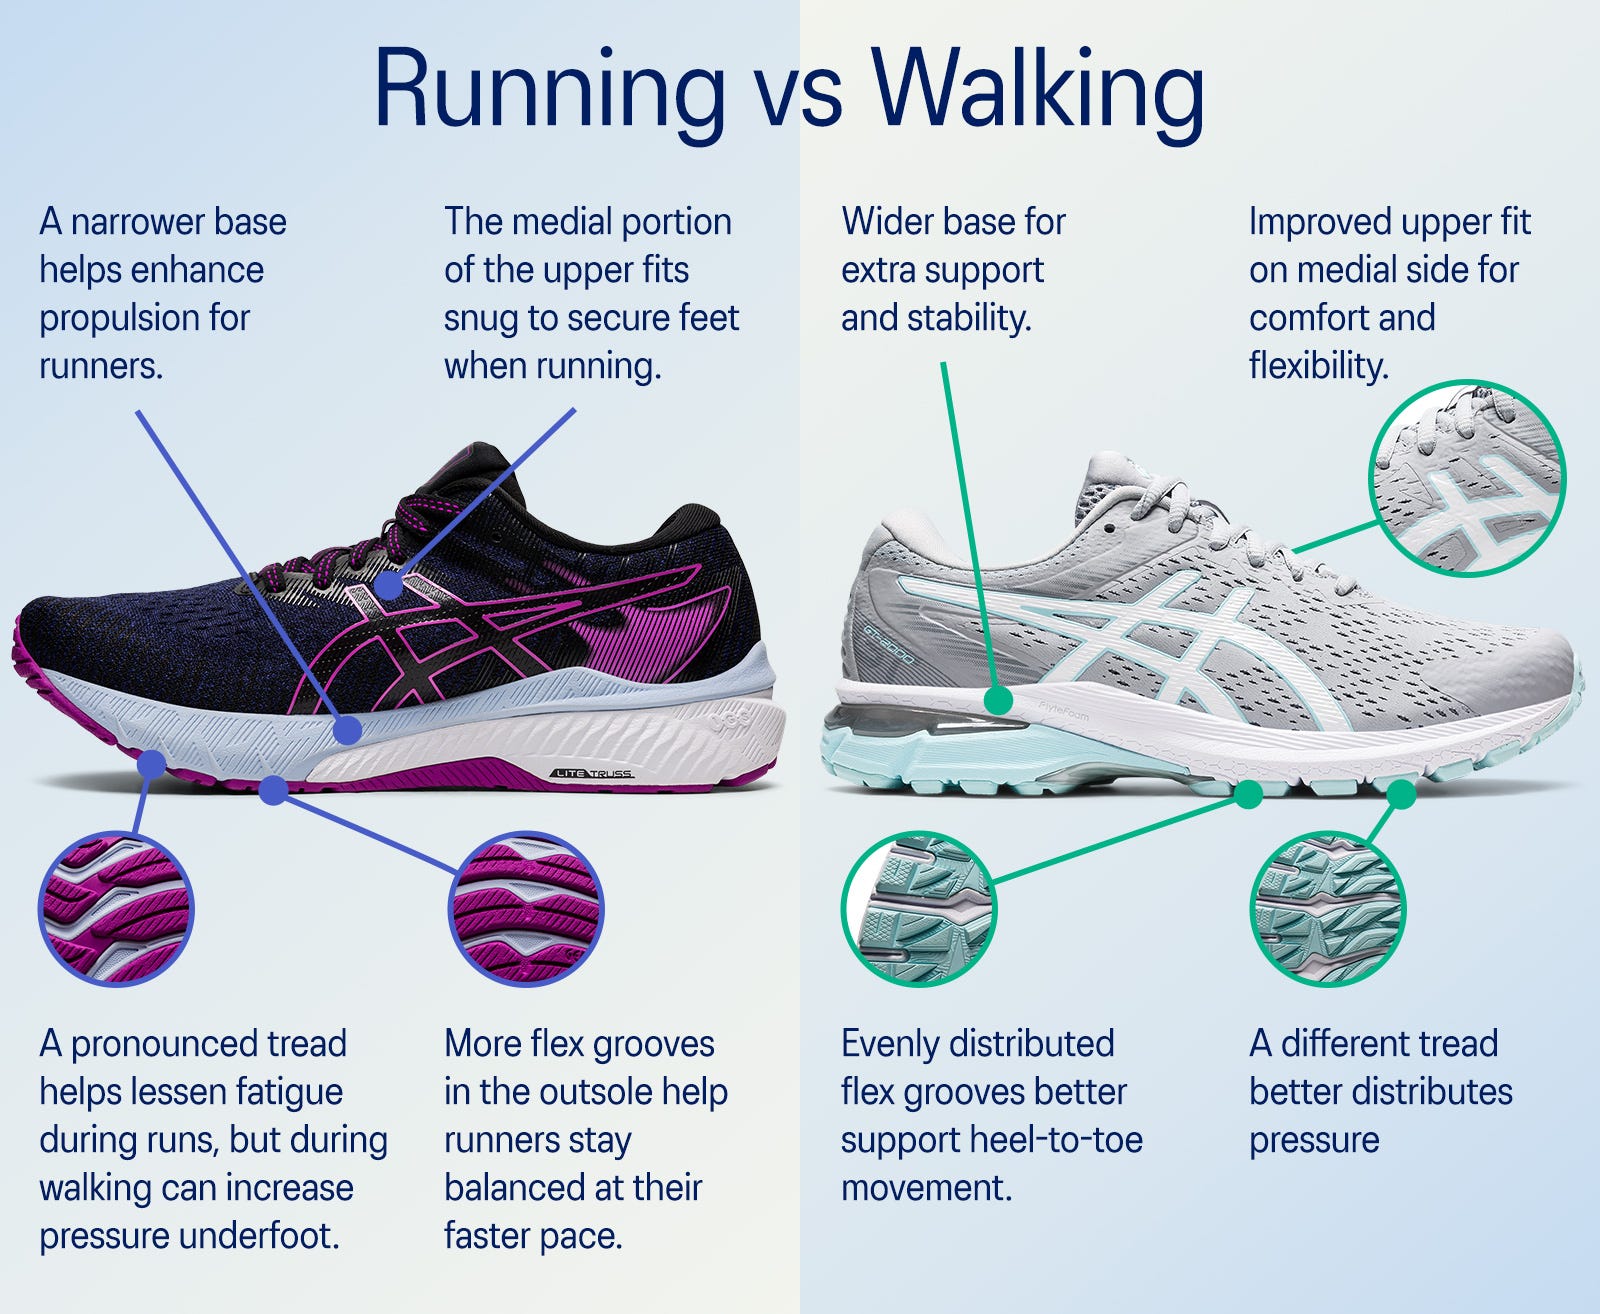 Difference between ASICS running shoes and walking shoes